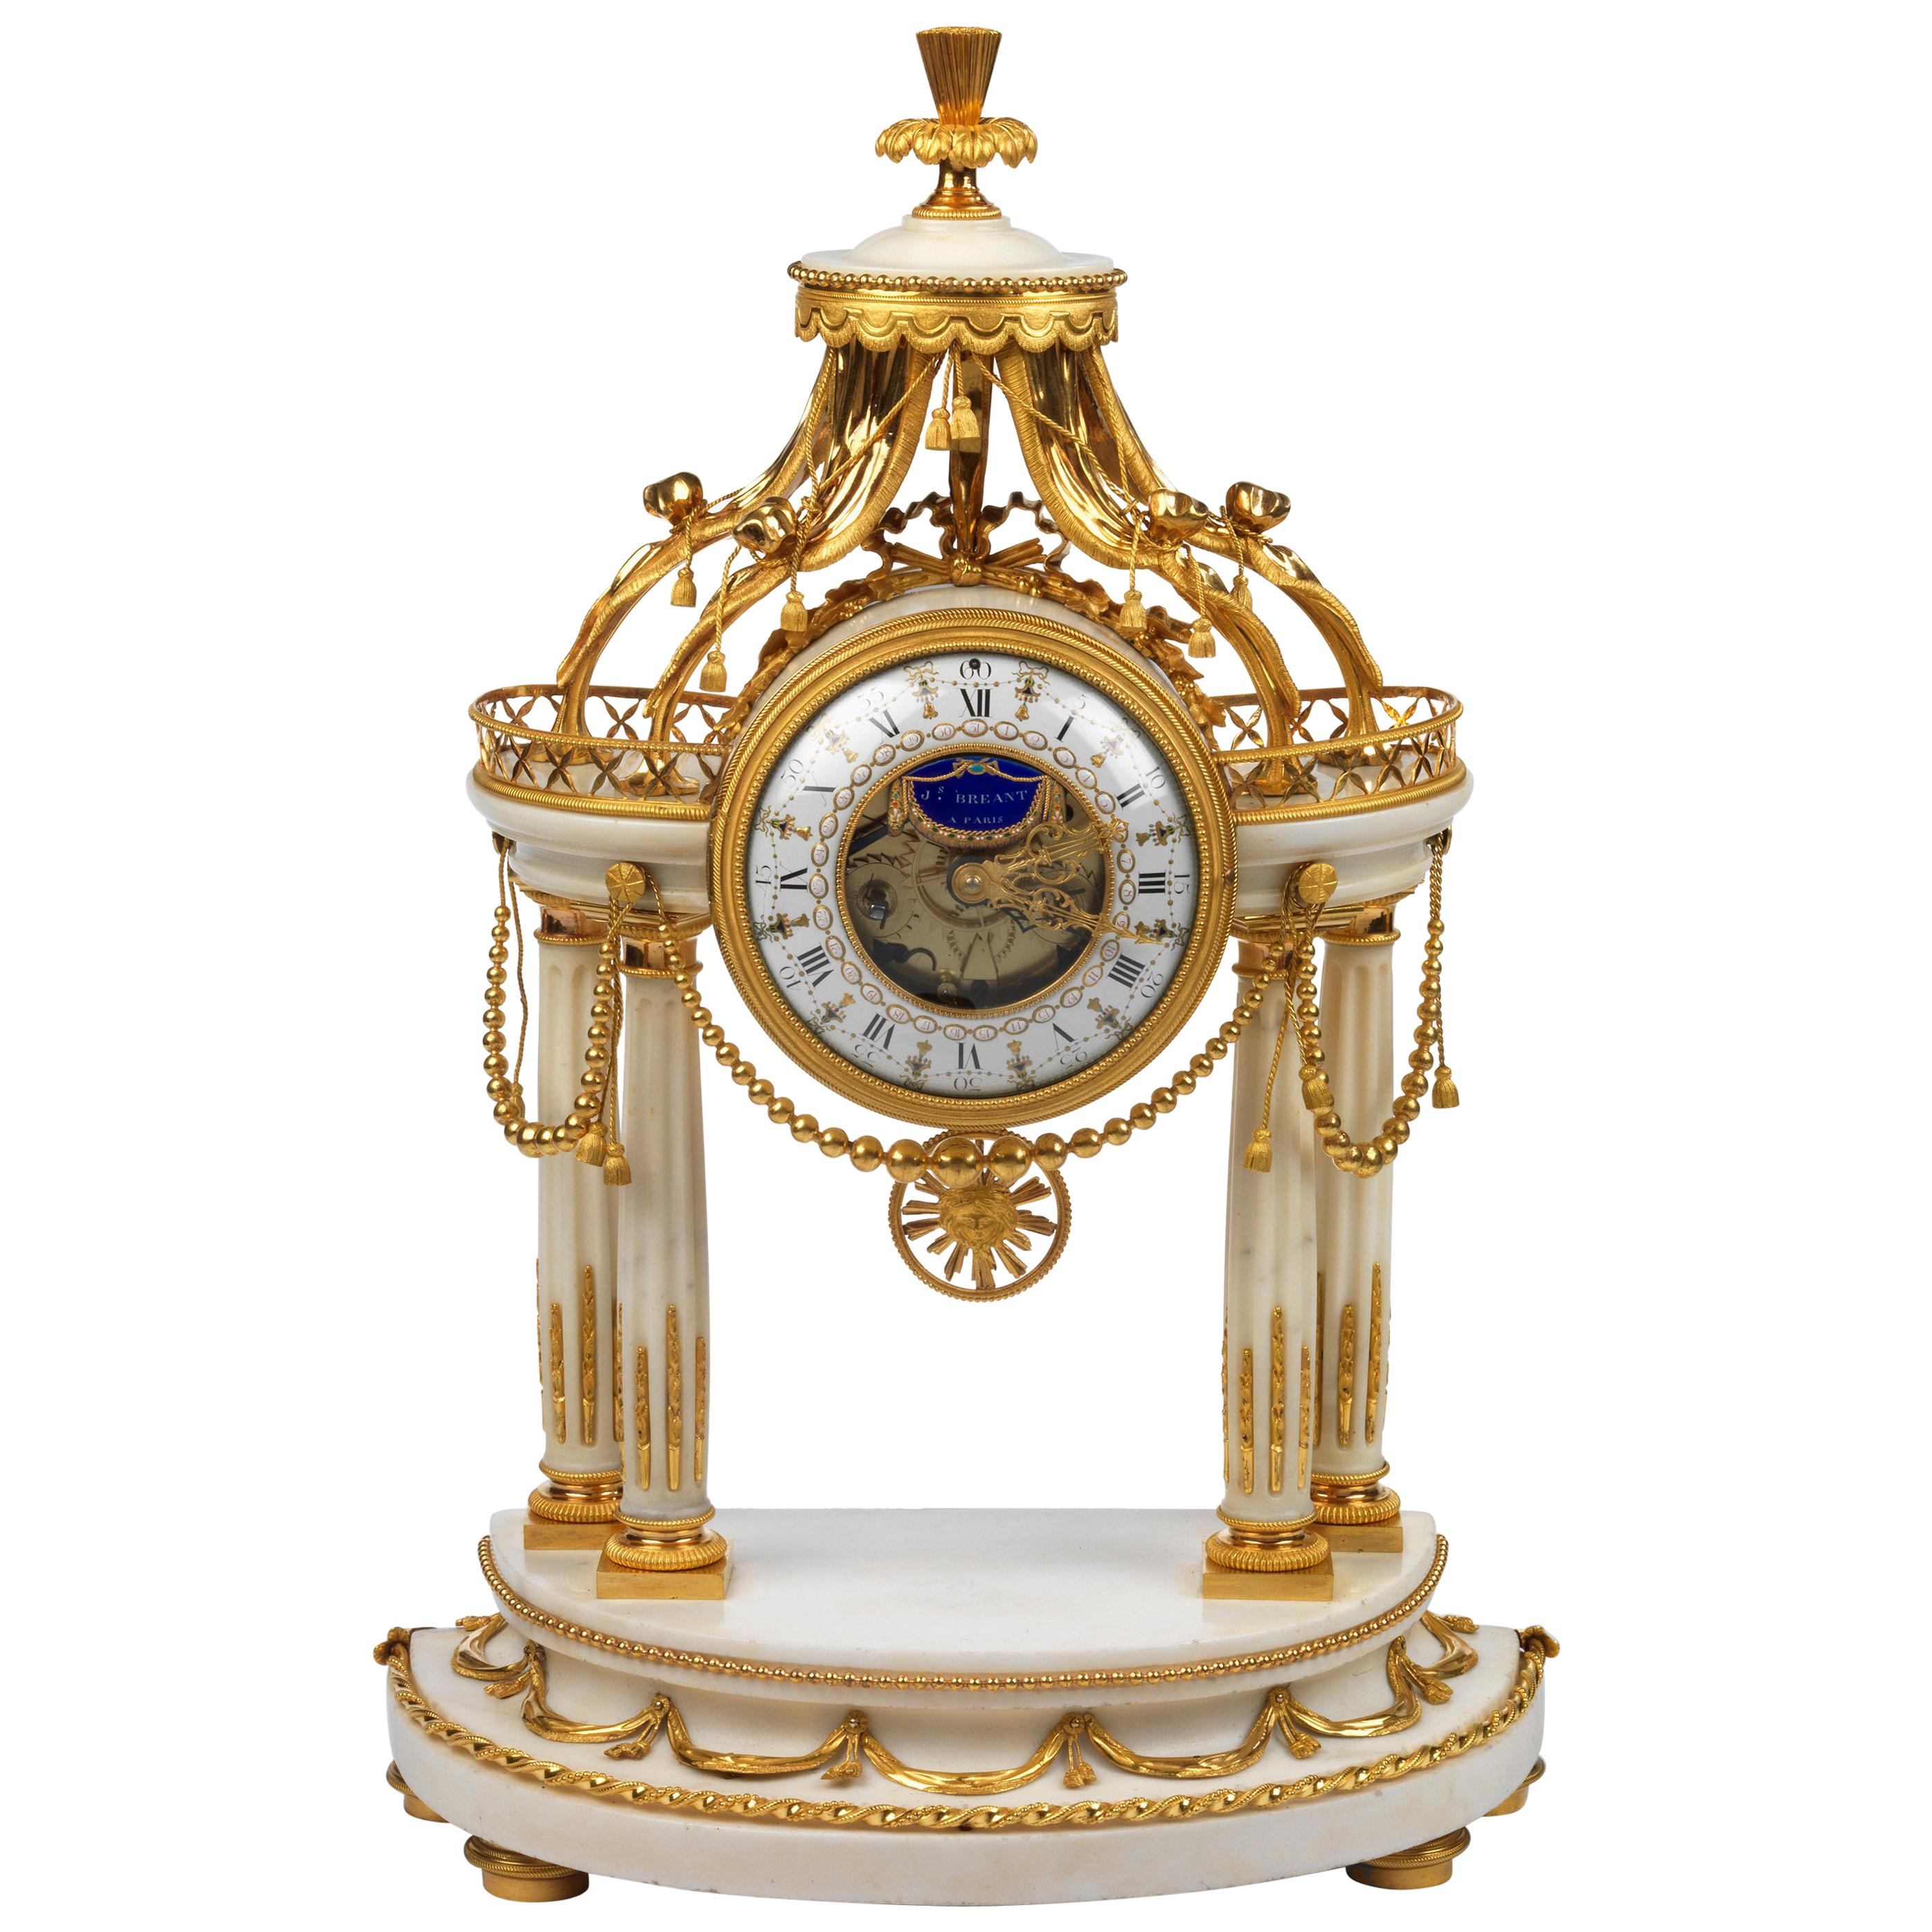 Louis XVI White Marble and Ormolu Portico Clock by J. S. Breant im Angebot